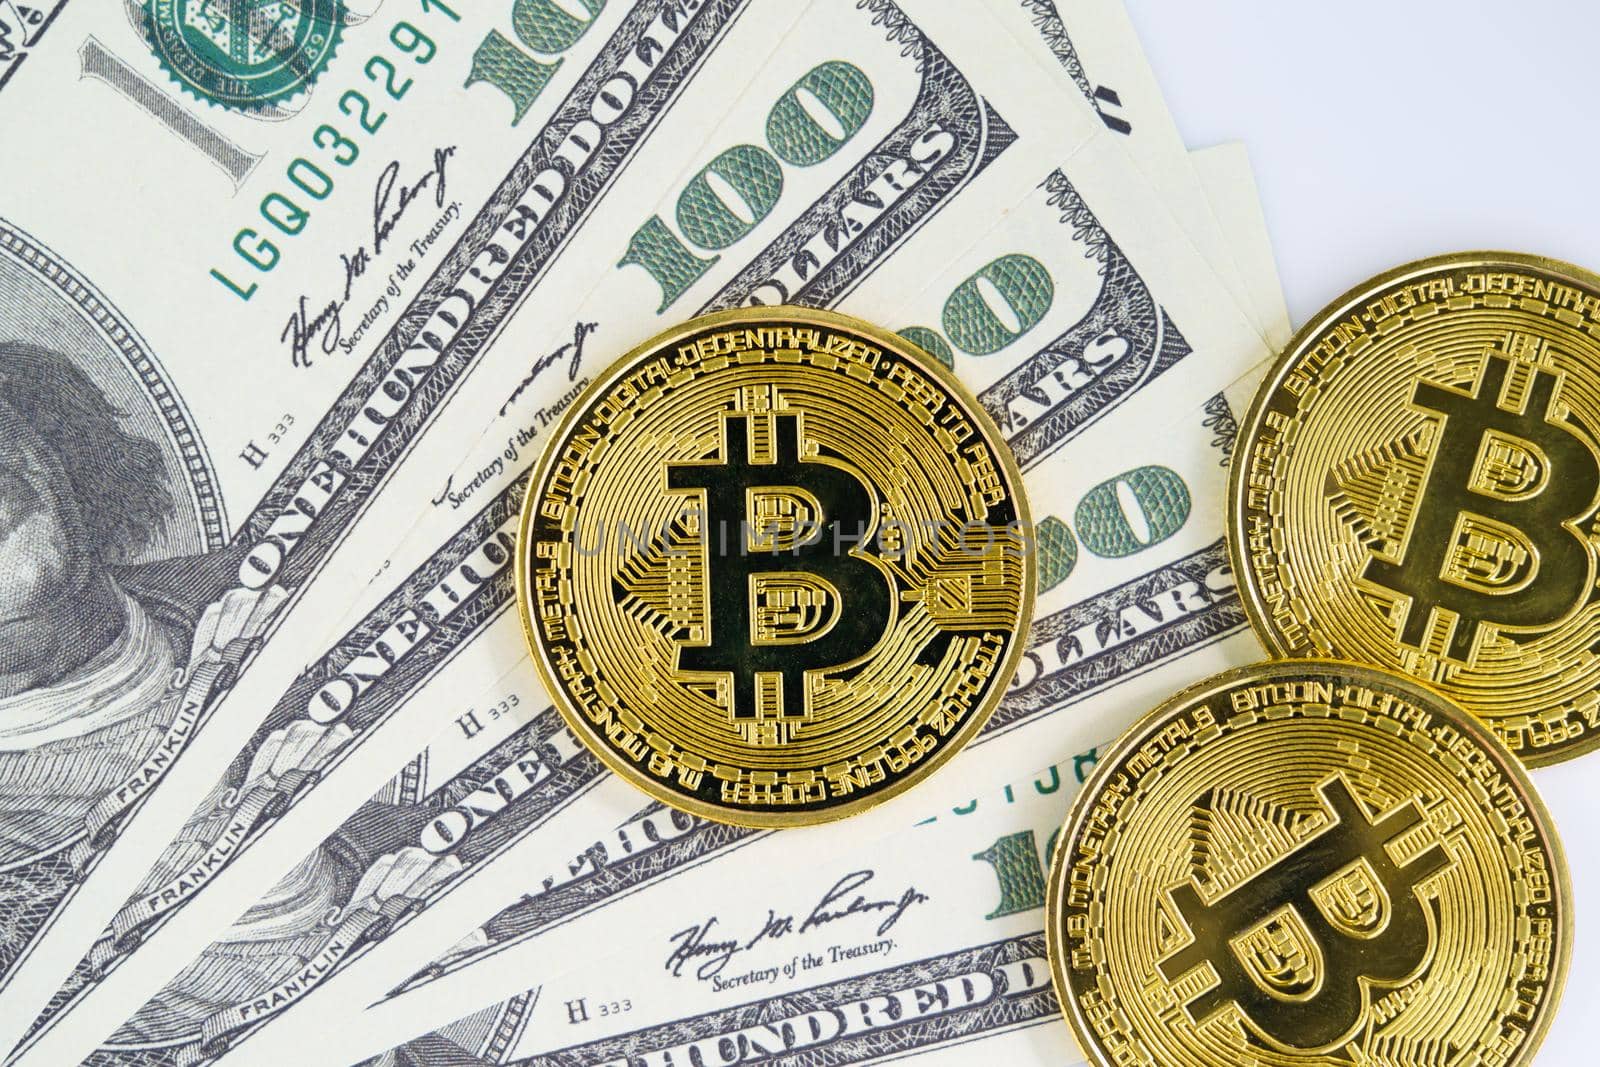 Bitcoins coin and banknotes of one hundred dollars. Close up of metal shiny bitcoin crypto currency coins and US dollar